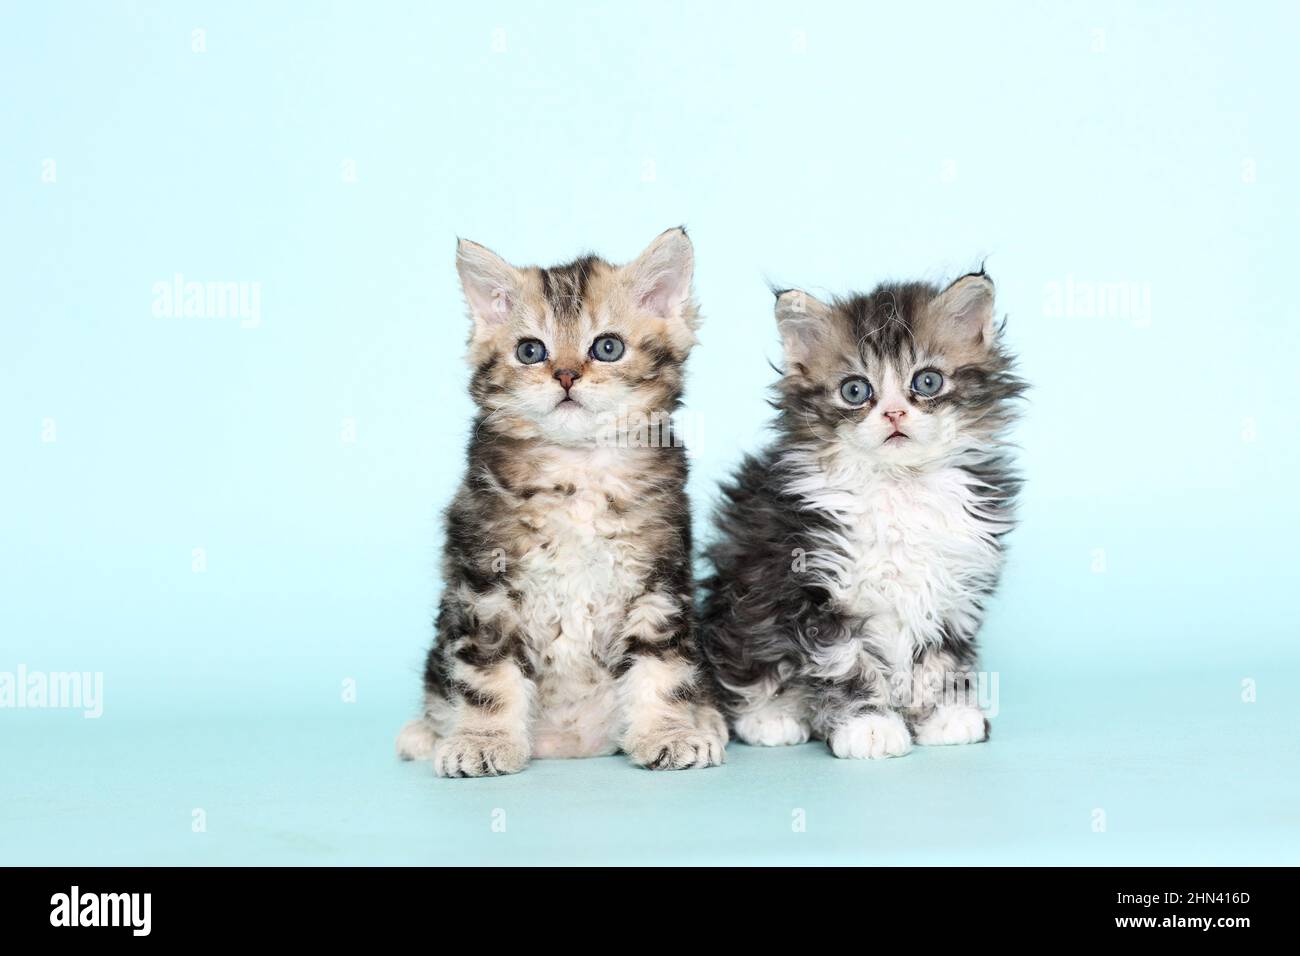 Selkirk Rex. Two kittens sitting. Studio picture against a light-blue background. Germany Stock Photo